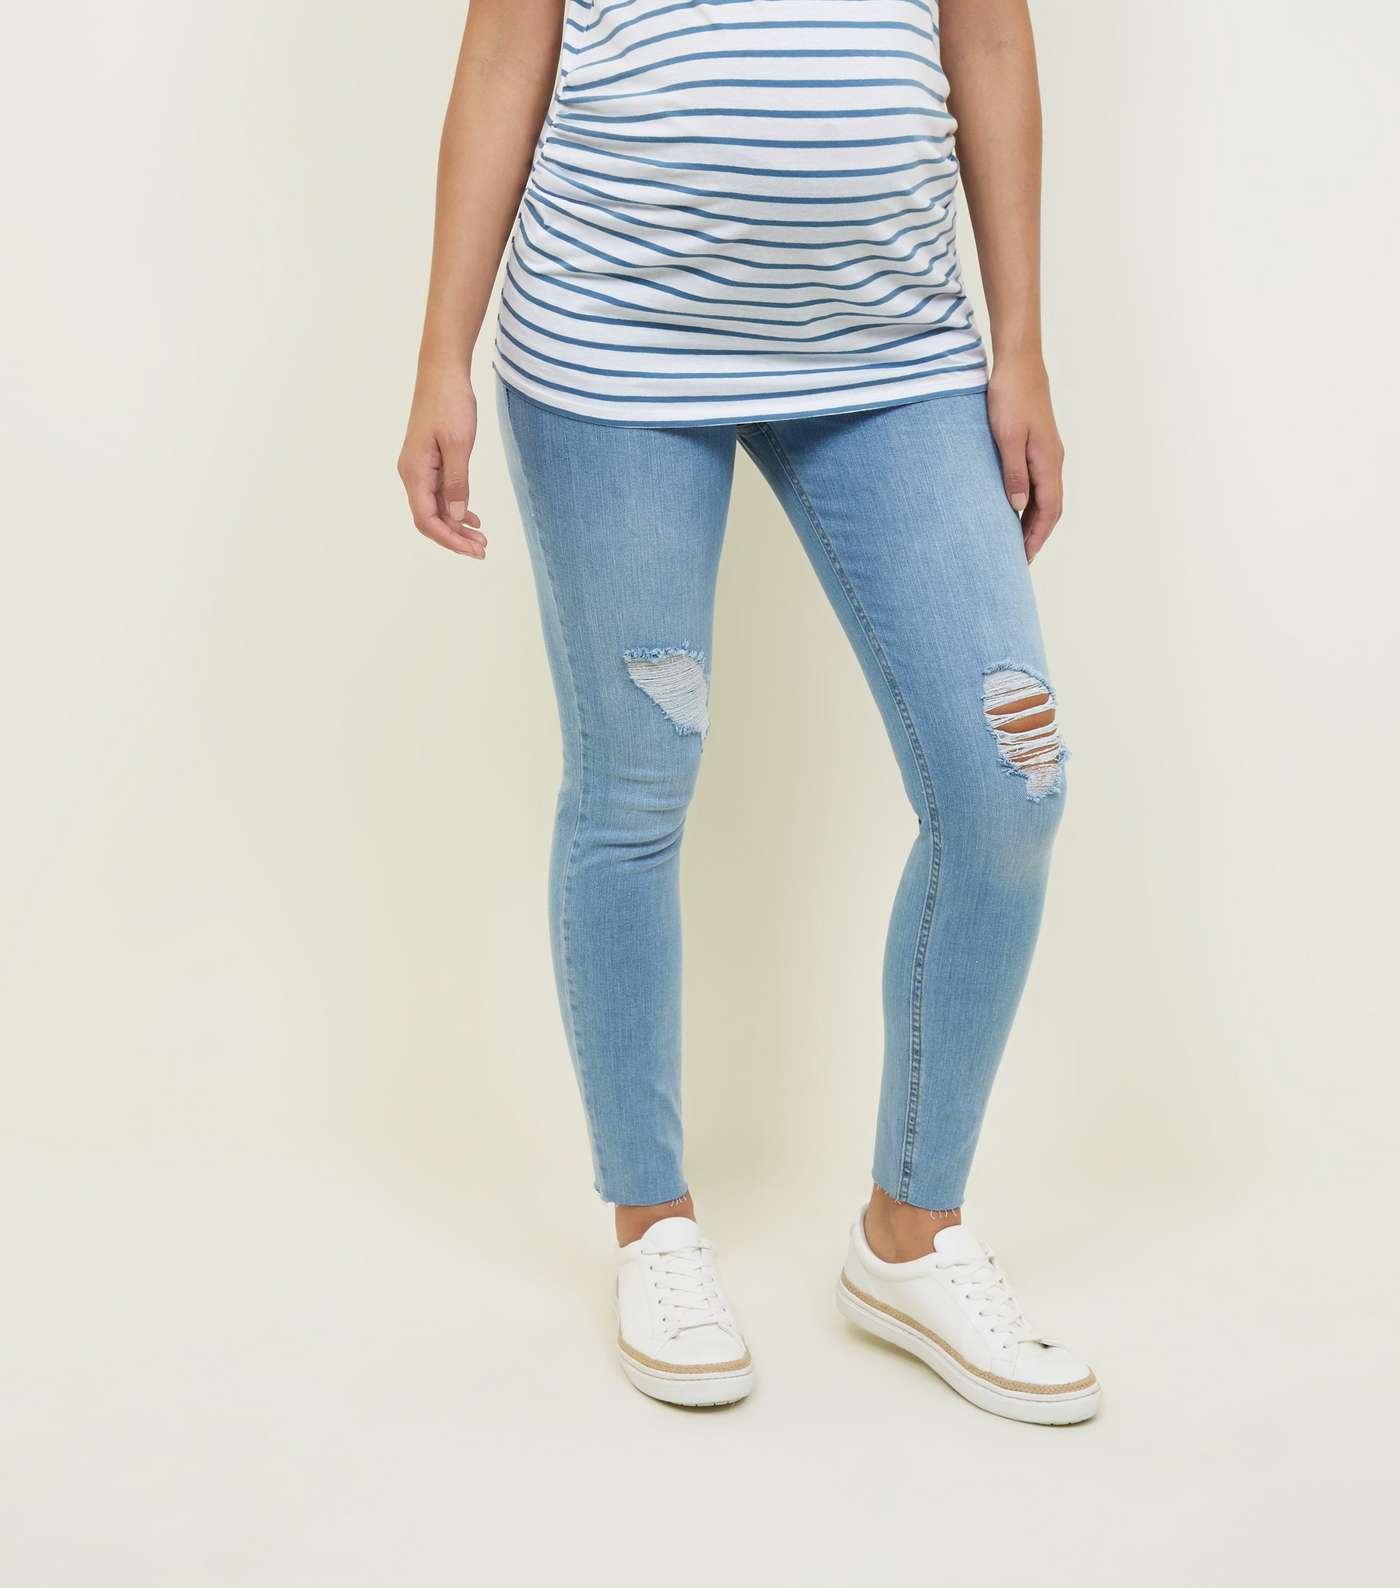 Maternity Bright Blue Under Bump Ripped Skinny Jeans Image 2